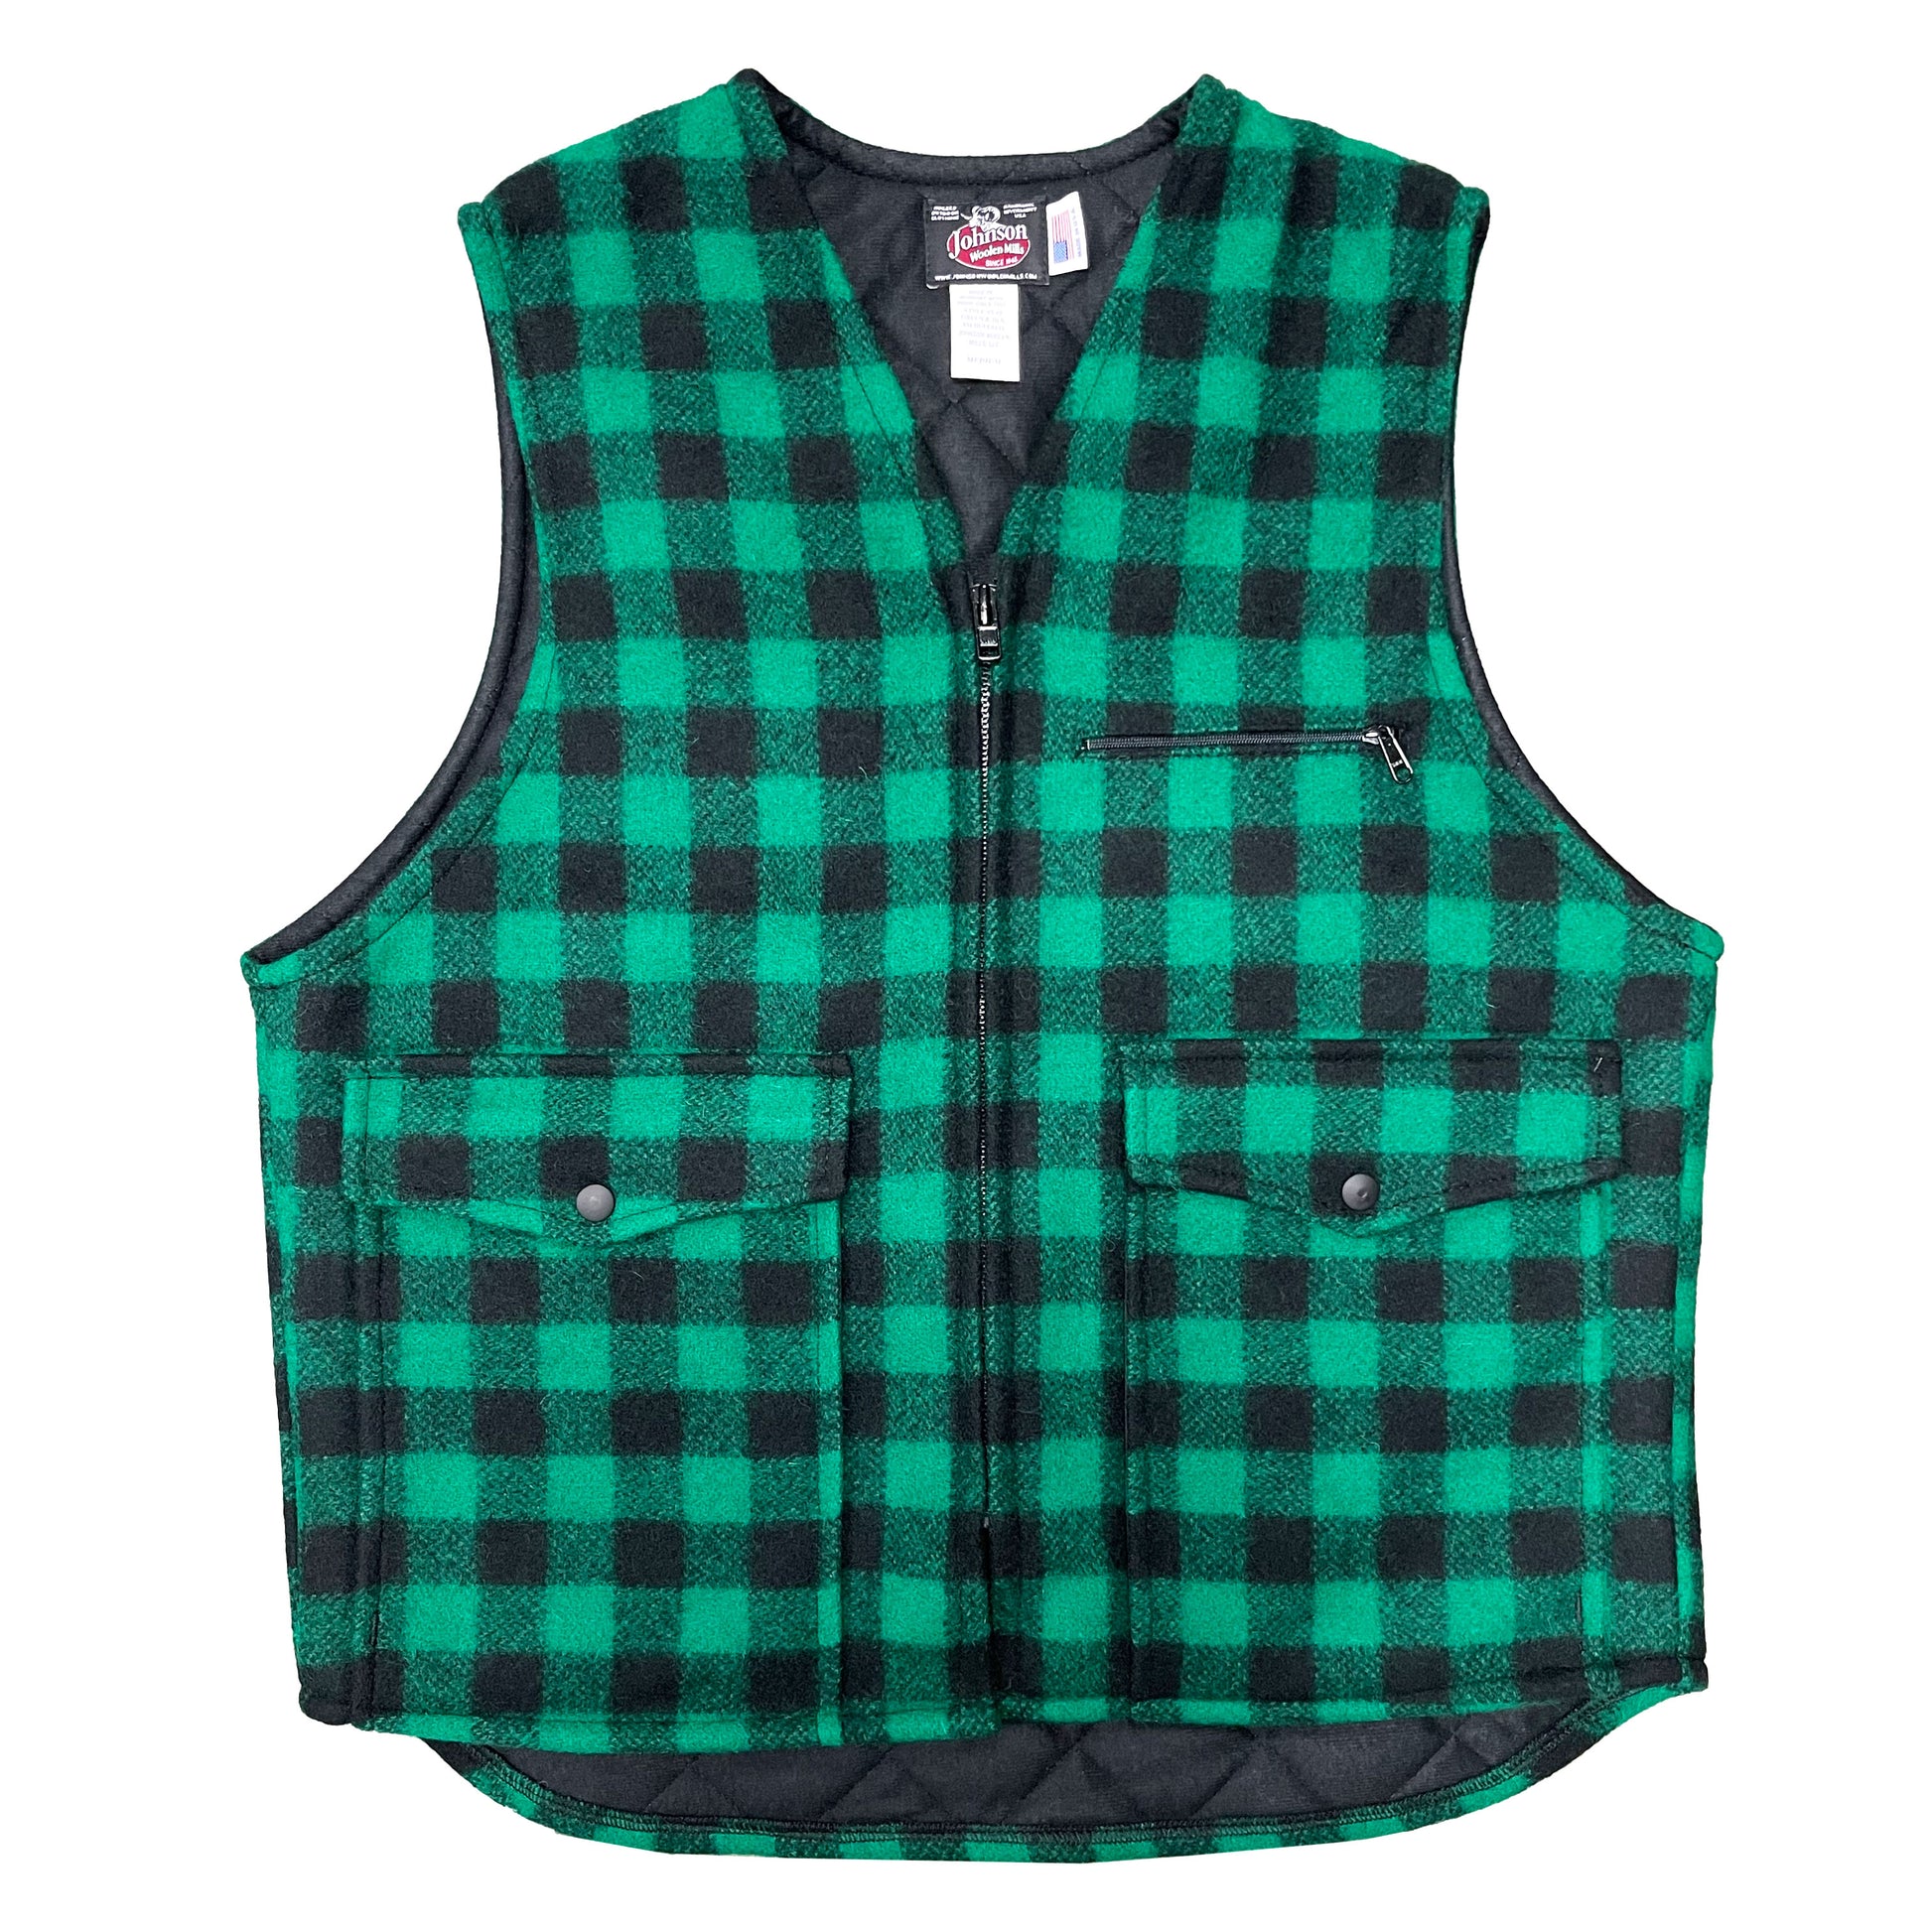 Vest with tricot lining, green & black buffalo check, zipper front, two large pockets and chest pocket, front view